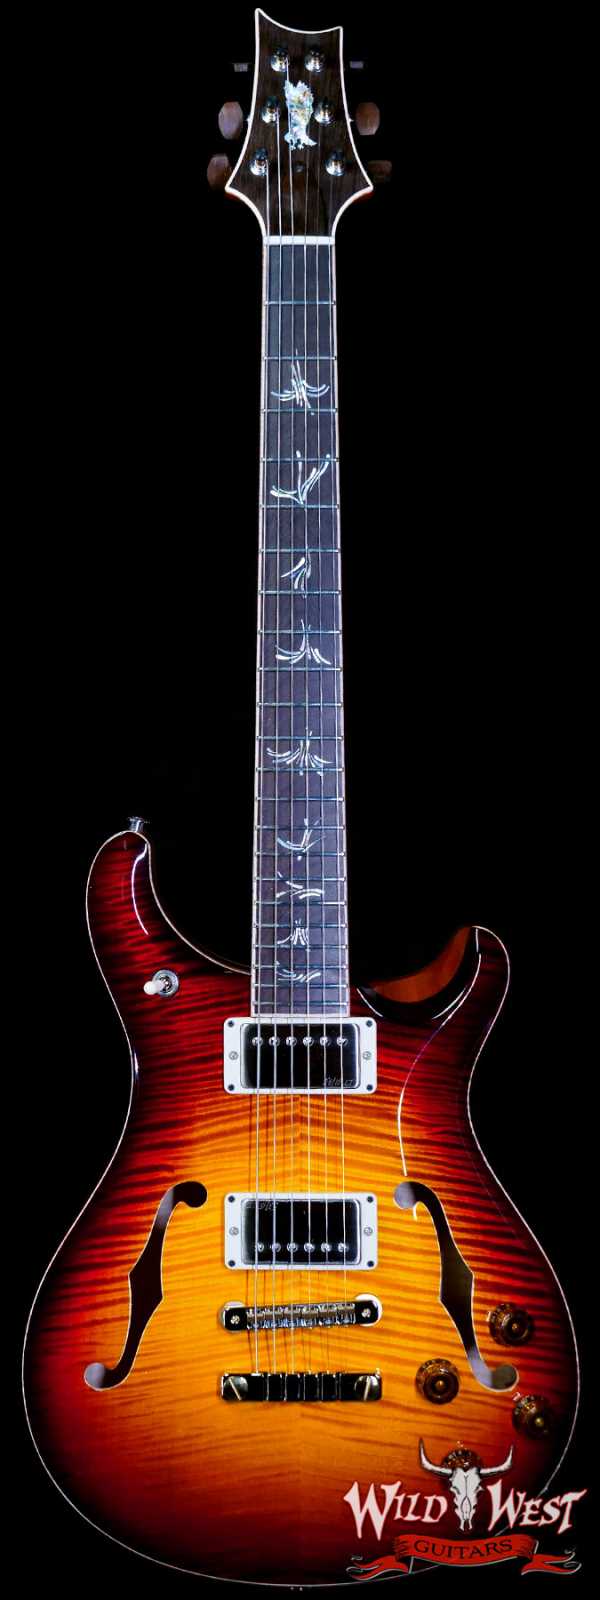 Paul Reed Smith PRS Private Stock #9788 McCarty 594 Hollowbody II Flame Maple Neck Brazilian Rosewood Board Dark Cherry Glow